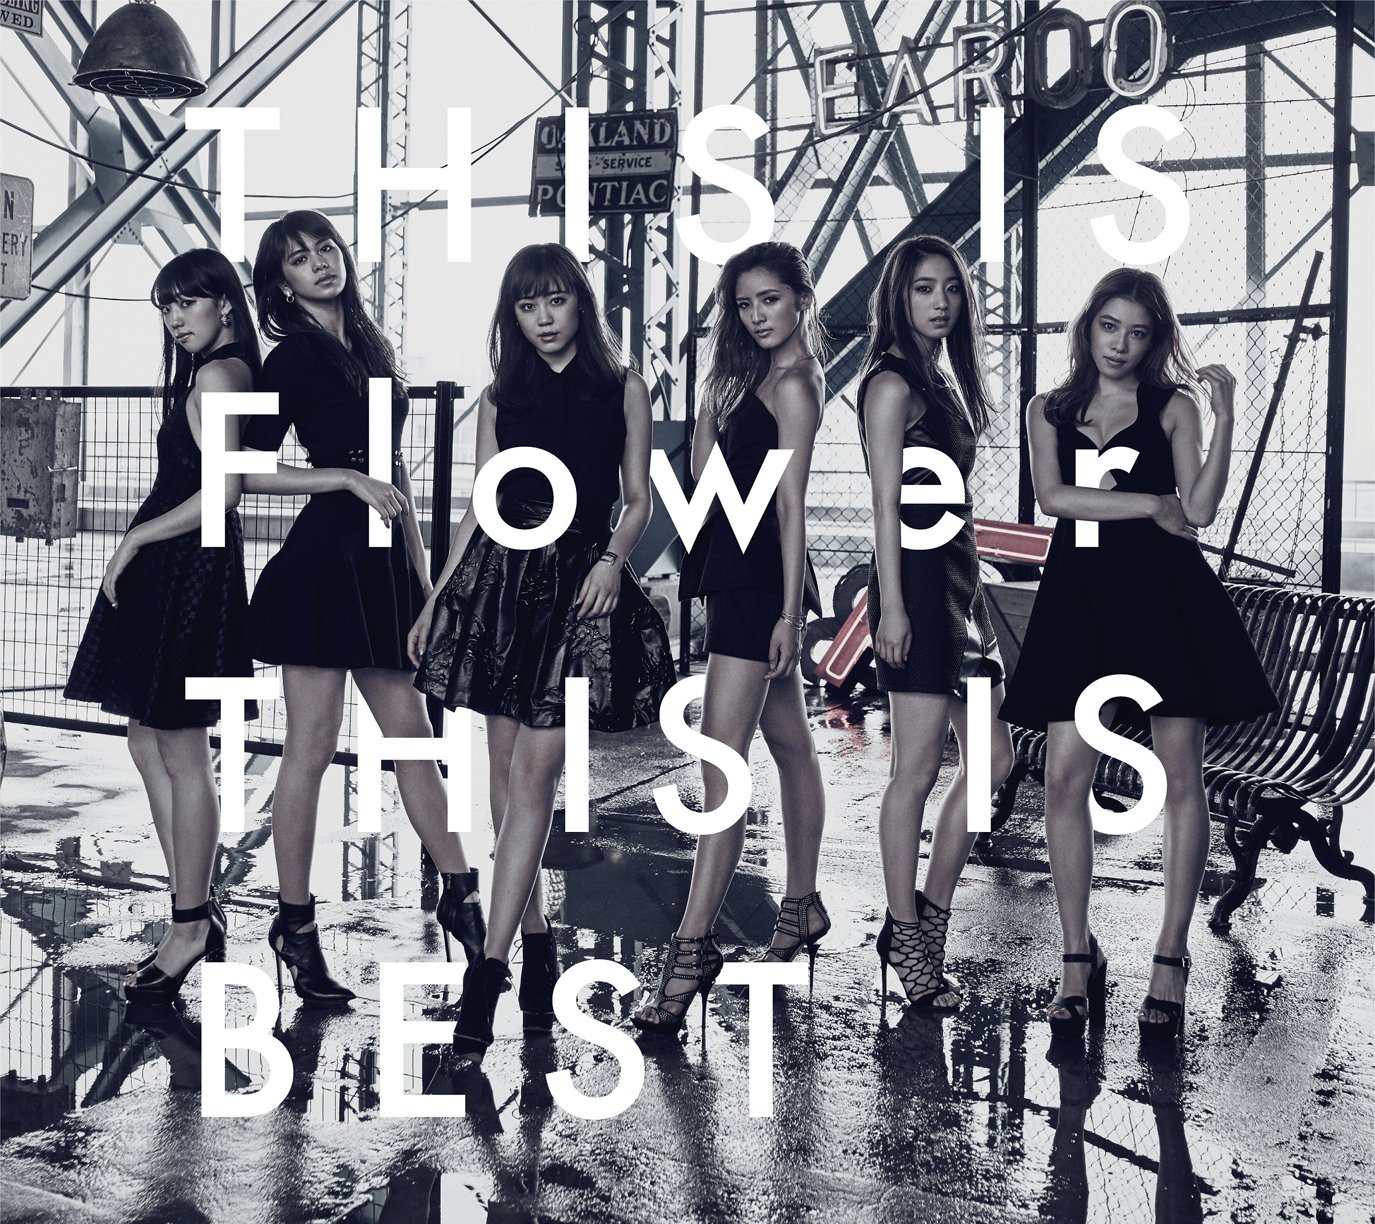 20160914.01.03 Flower - THIS IS Flower THIS IS BEST (M4A) cover.jpg